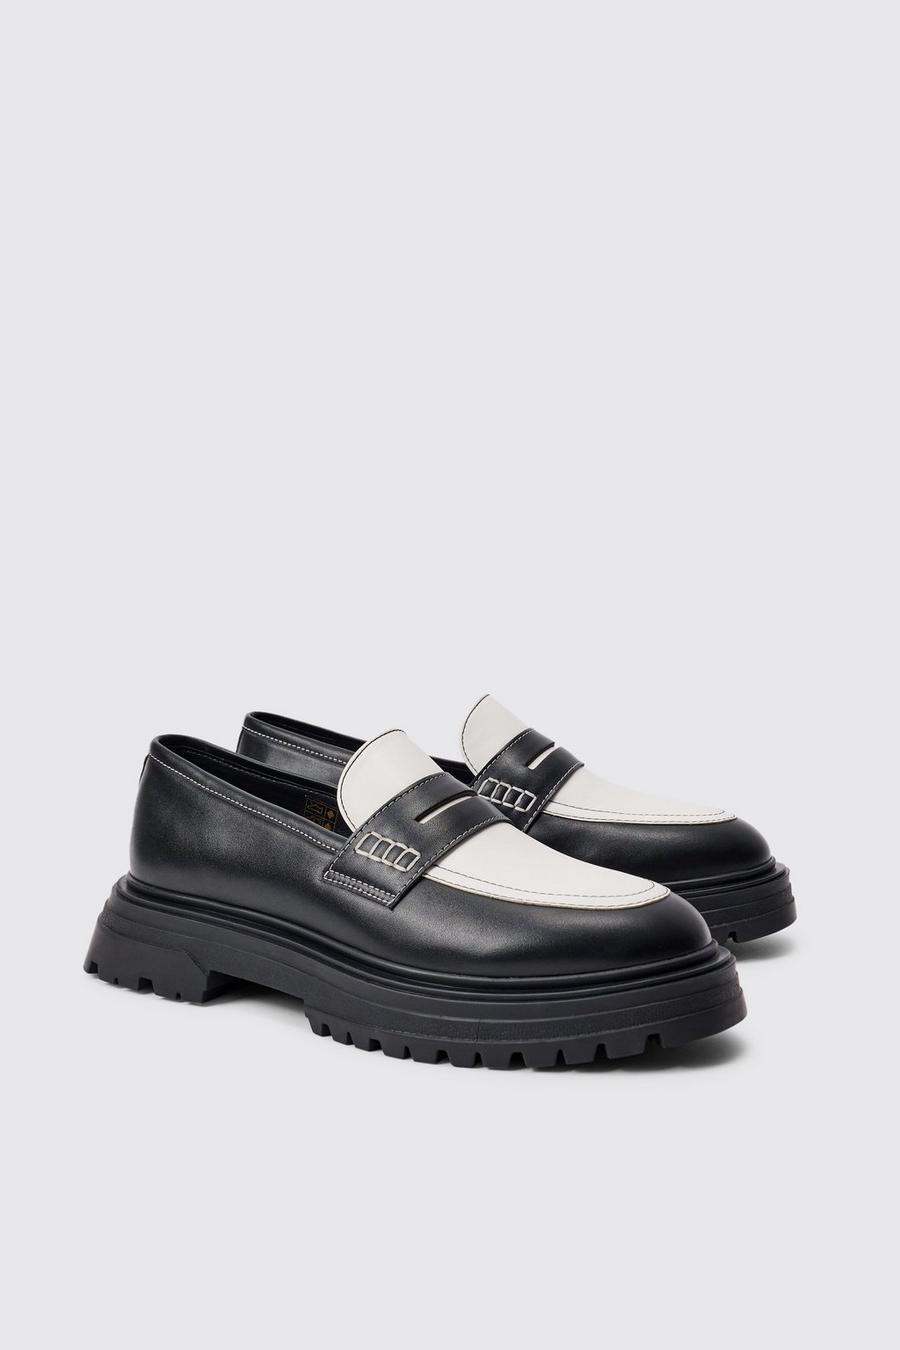 PU Slip On Contrast Chunky Loafer In Black